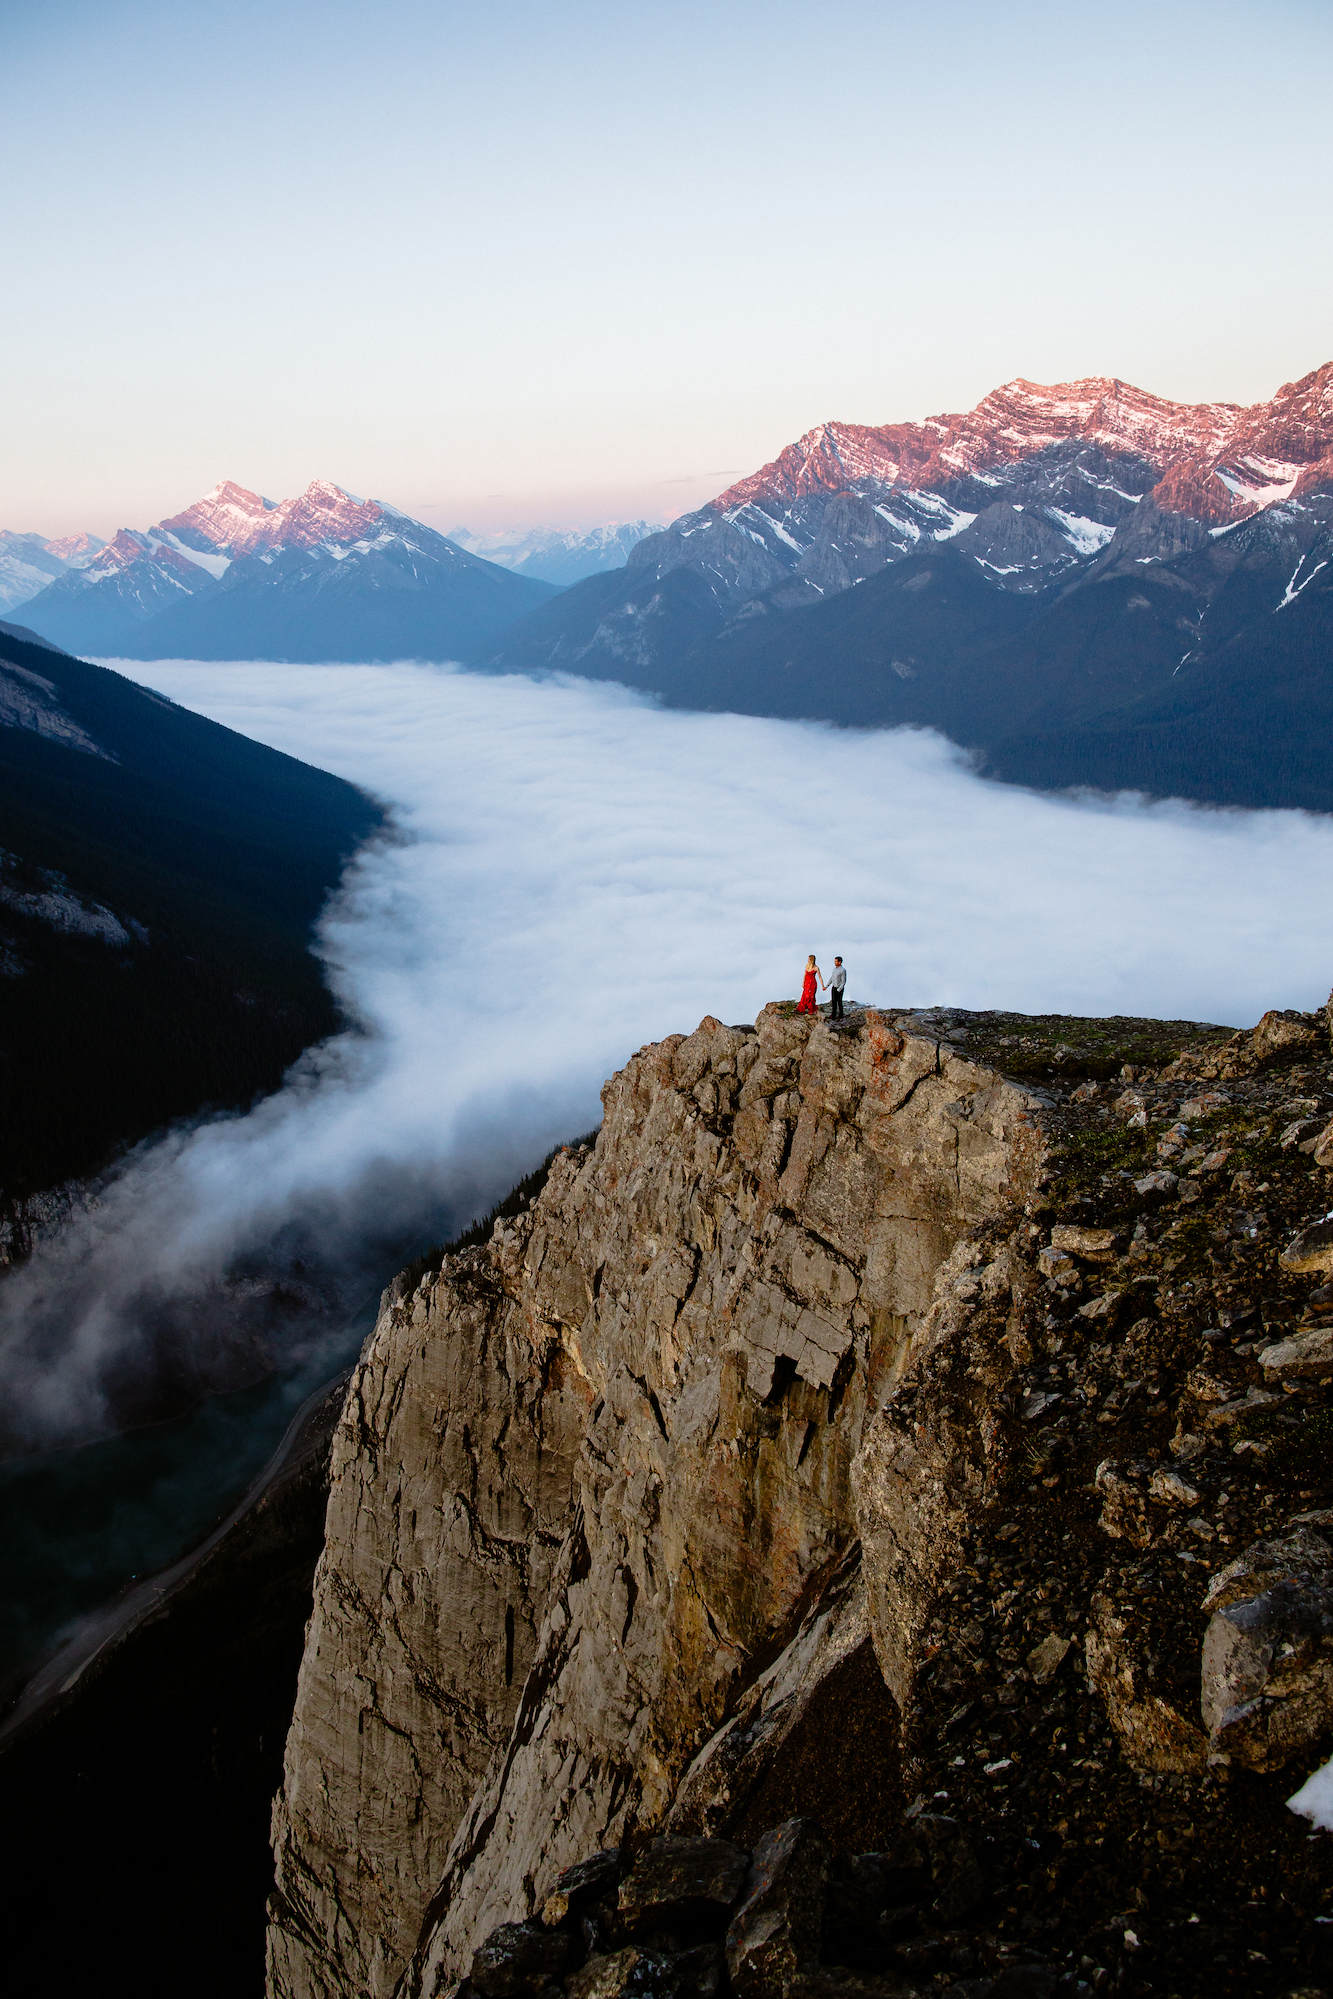 Banff Engagement Photographers and BC Adventure Weddings for Hiking Elopement Photos